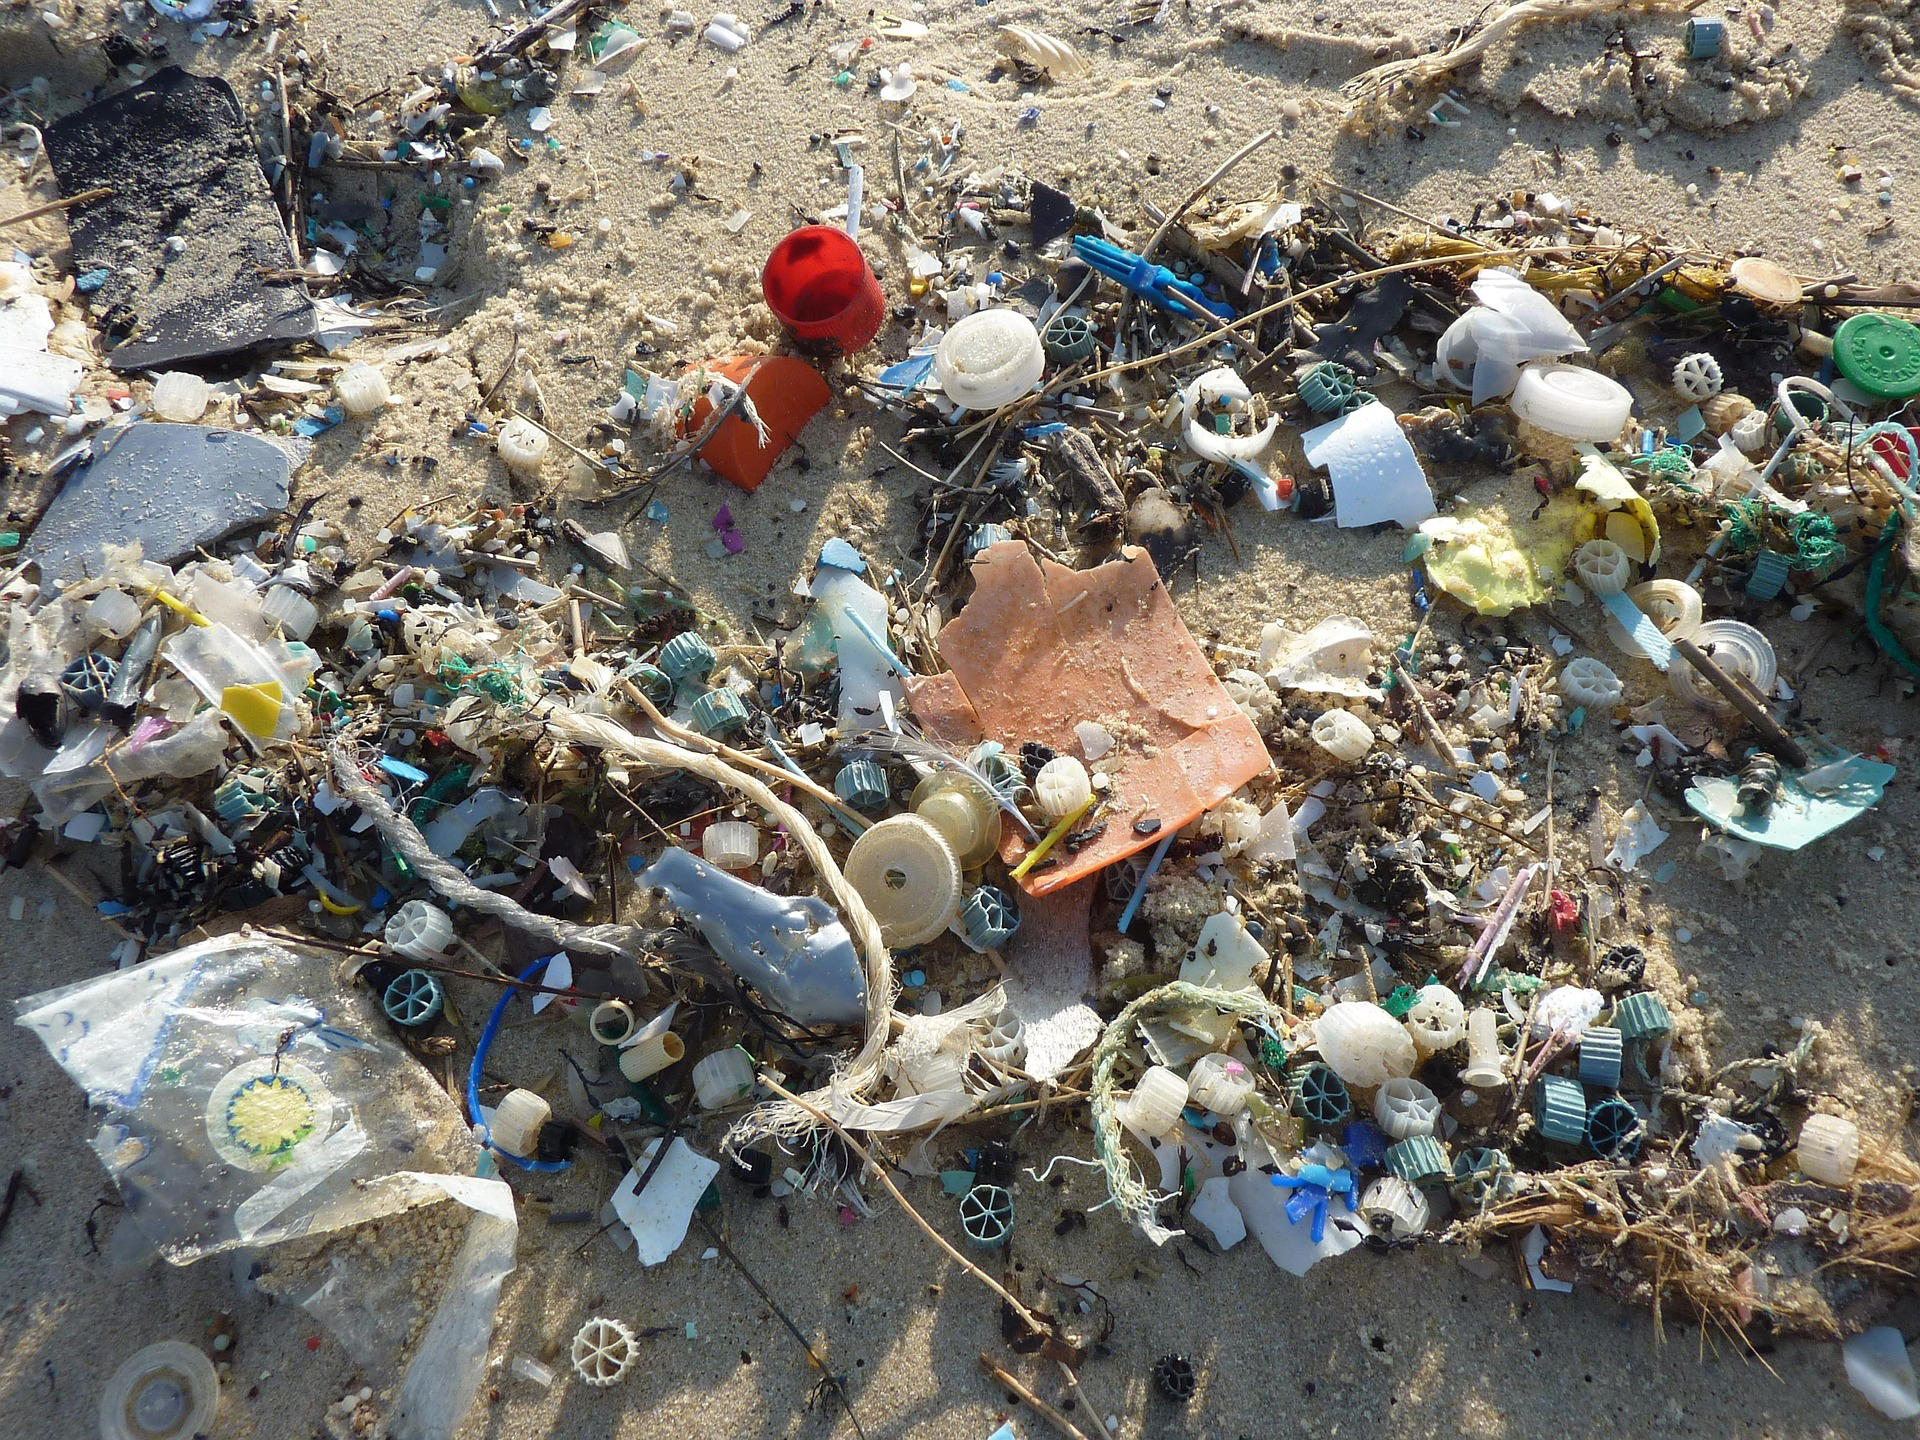 Photos of plastic in the ocean. Courtesy of Pixabay